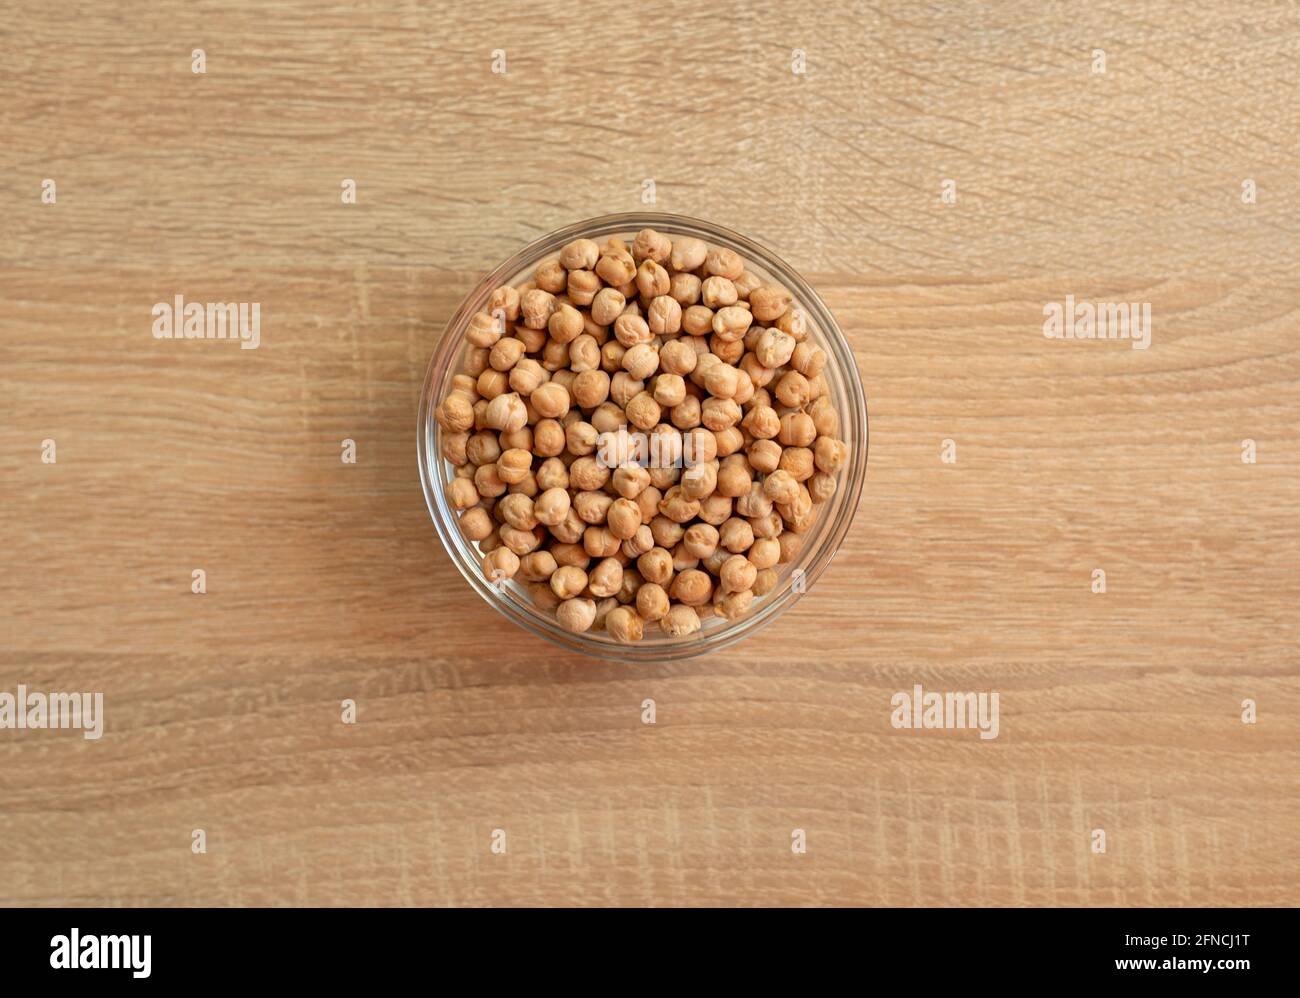 Bowl of raw grain chickpeas on a wooden table Stock Photo